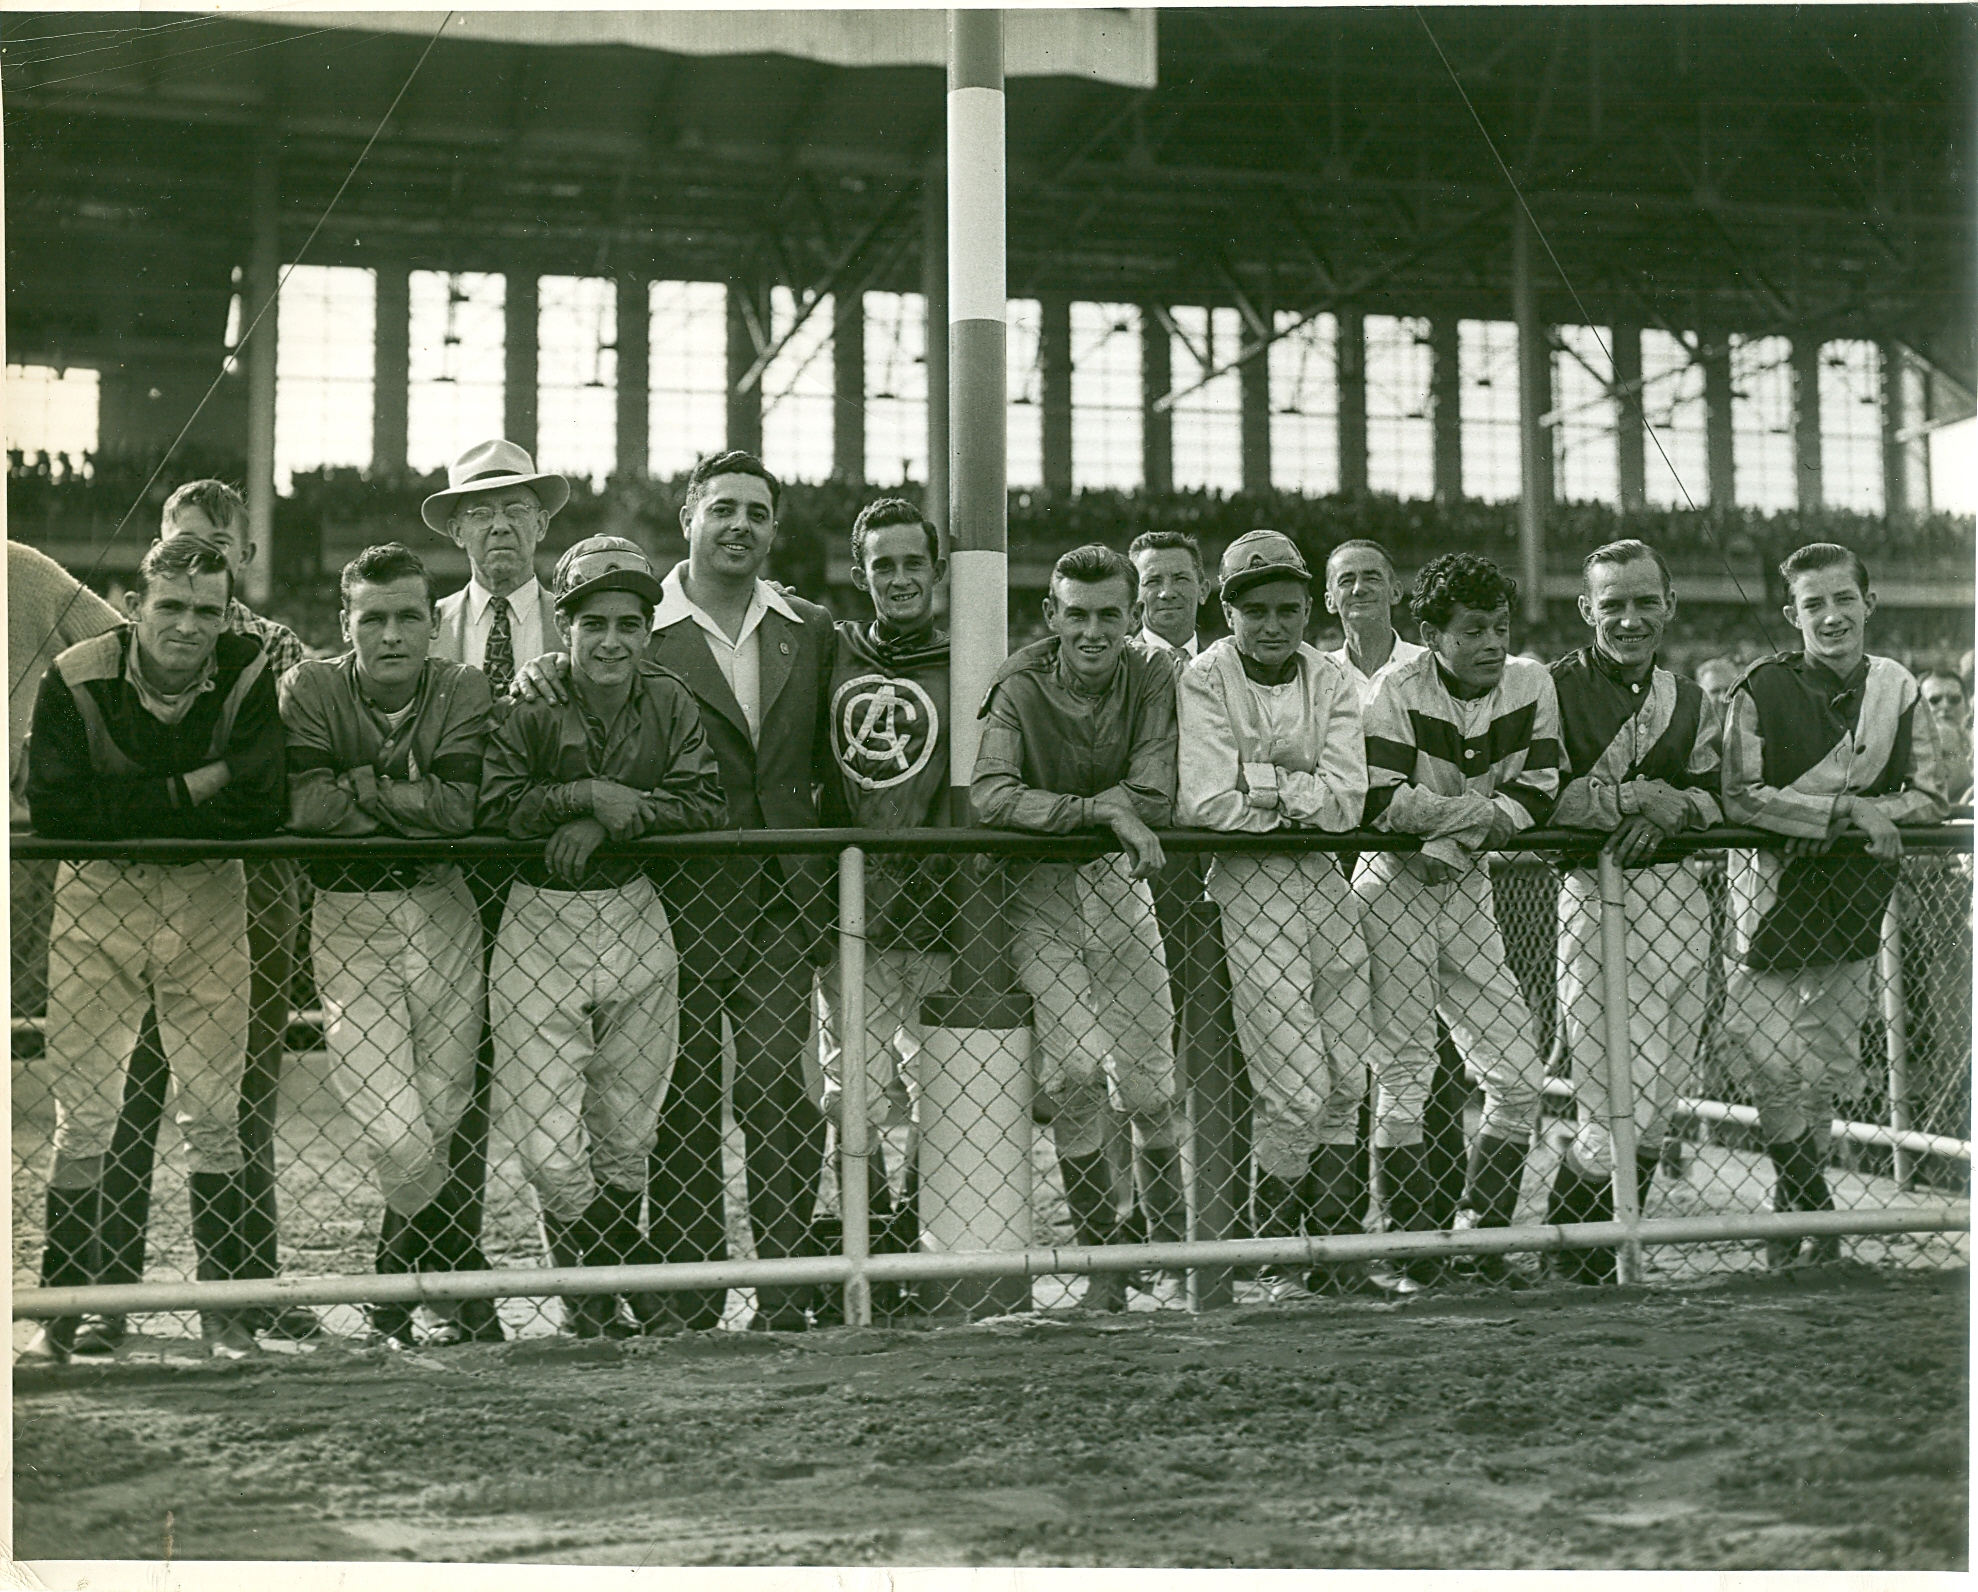 The Jockeys are looking at President and Mrs. Eisenhower during their visit to Belmont Park. View full size.